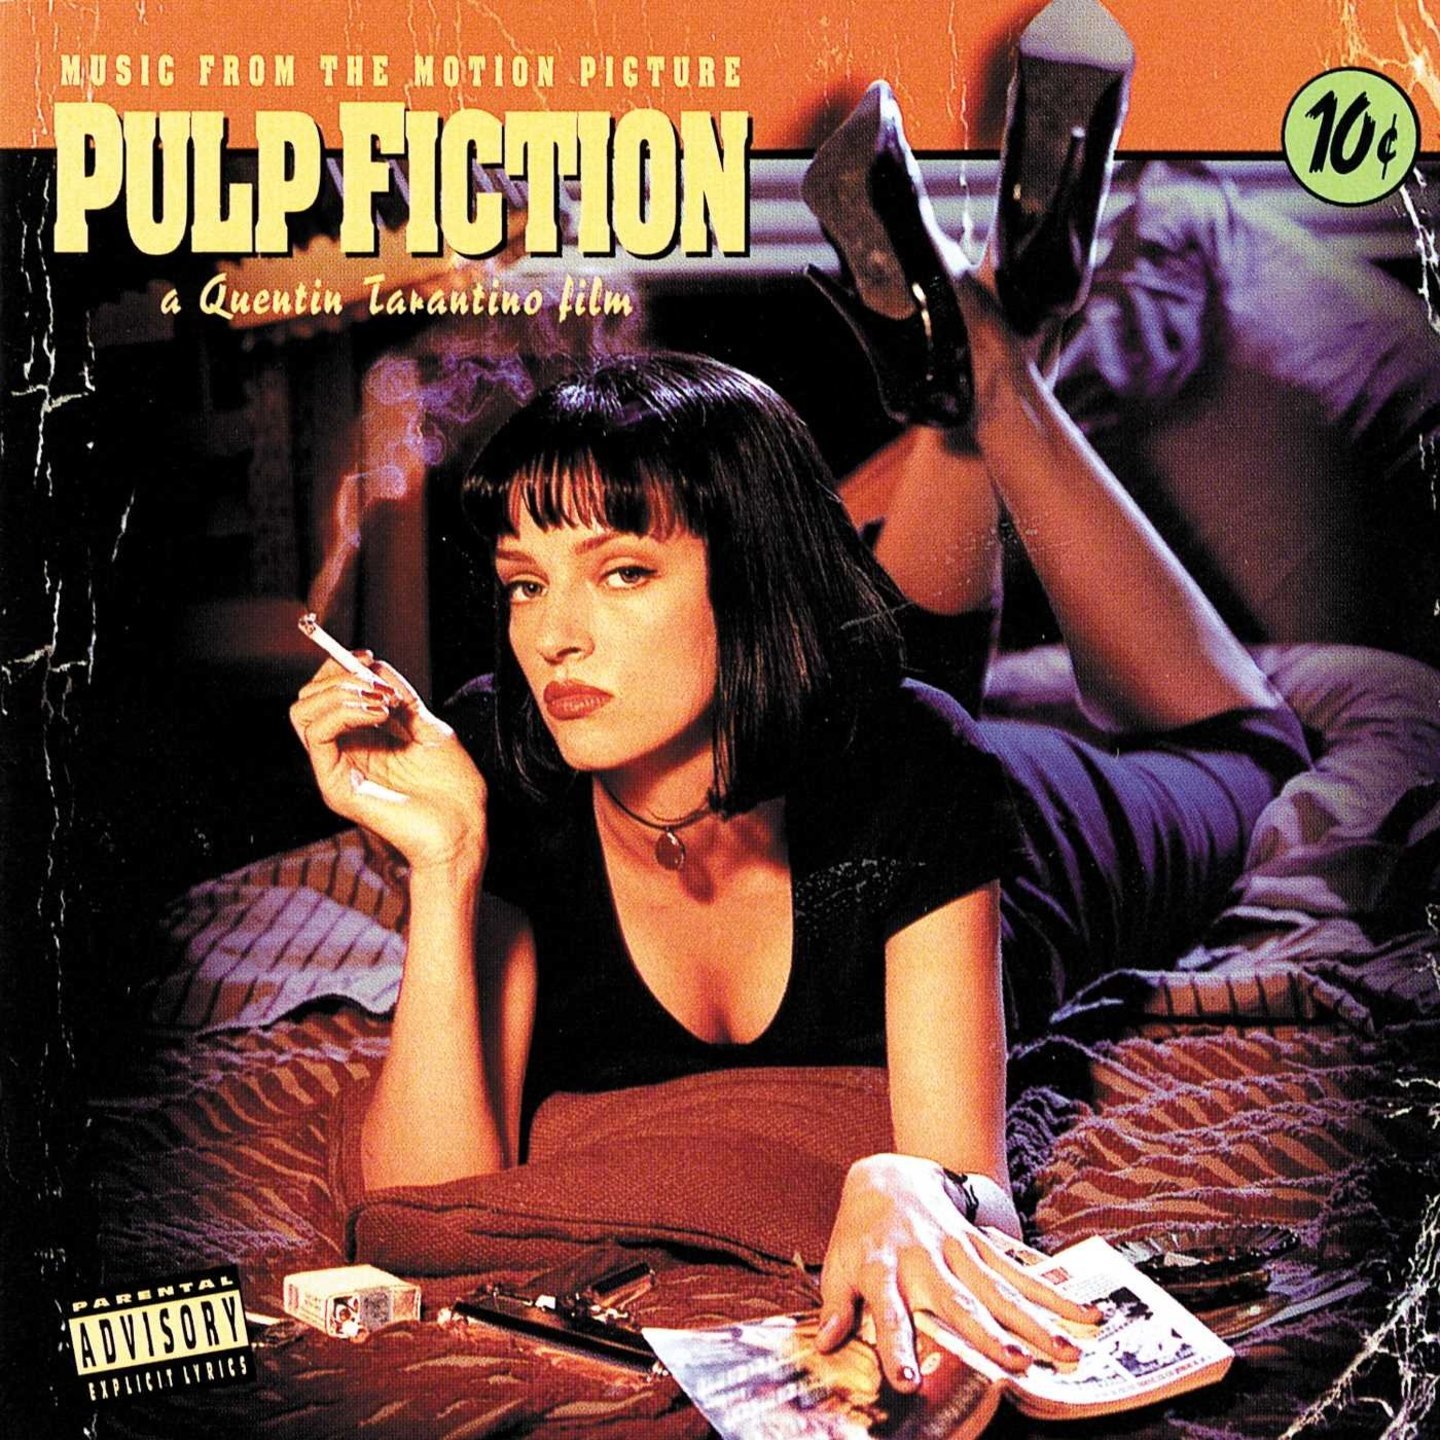 VA - Pulp Fiction Music From The Motion Picture LP 180g